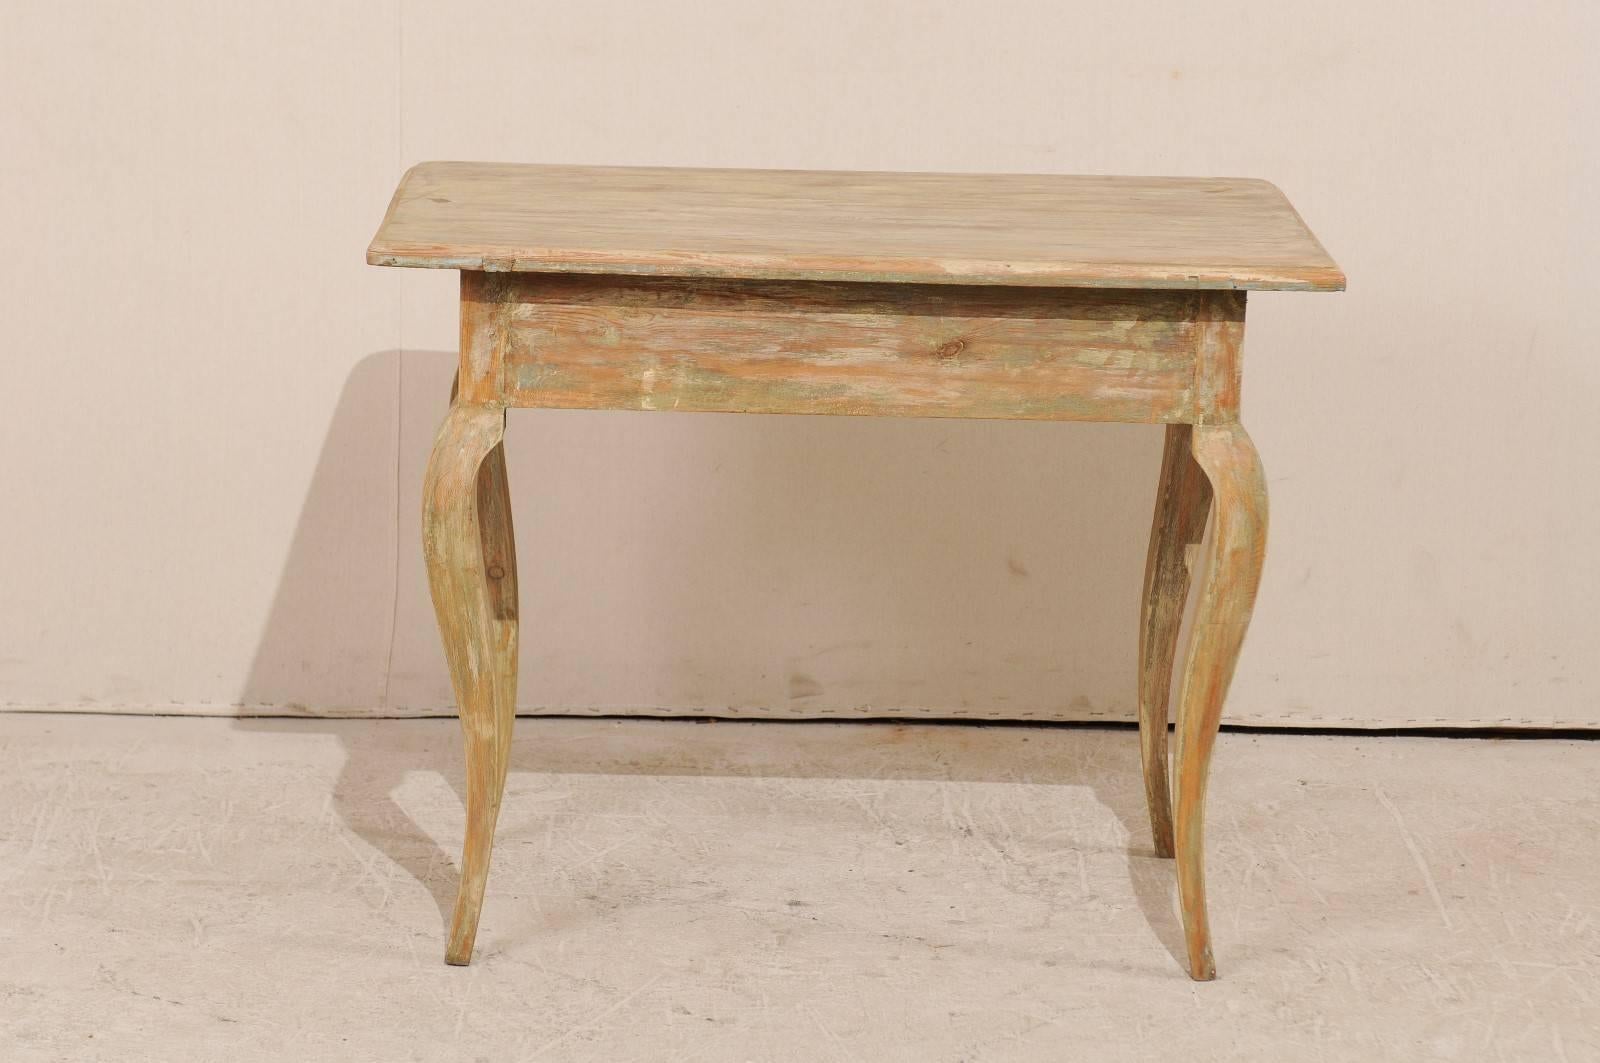 Period Rococo Painted Wood Side Table from the 18th Century with Cabriole Legs 1